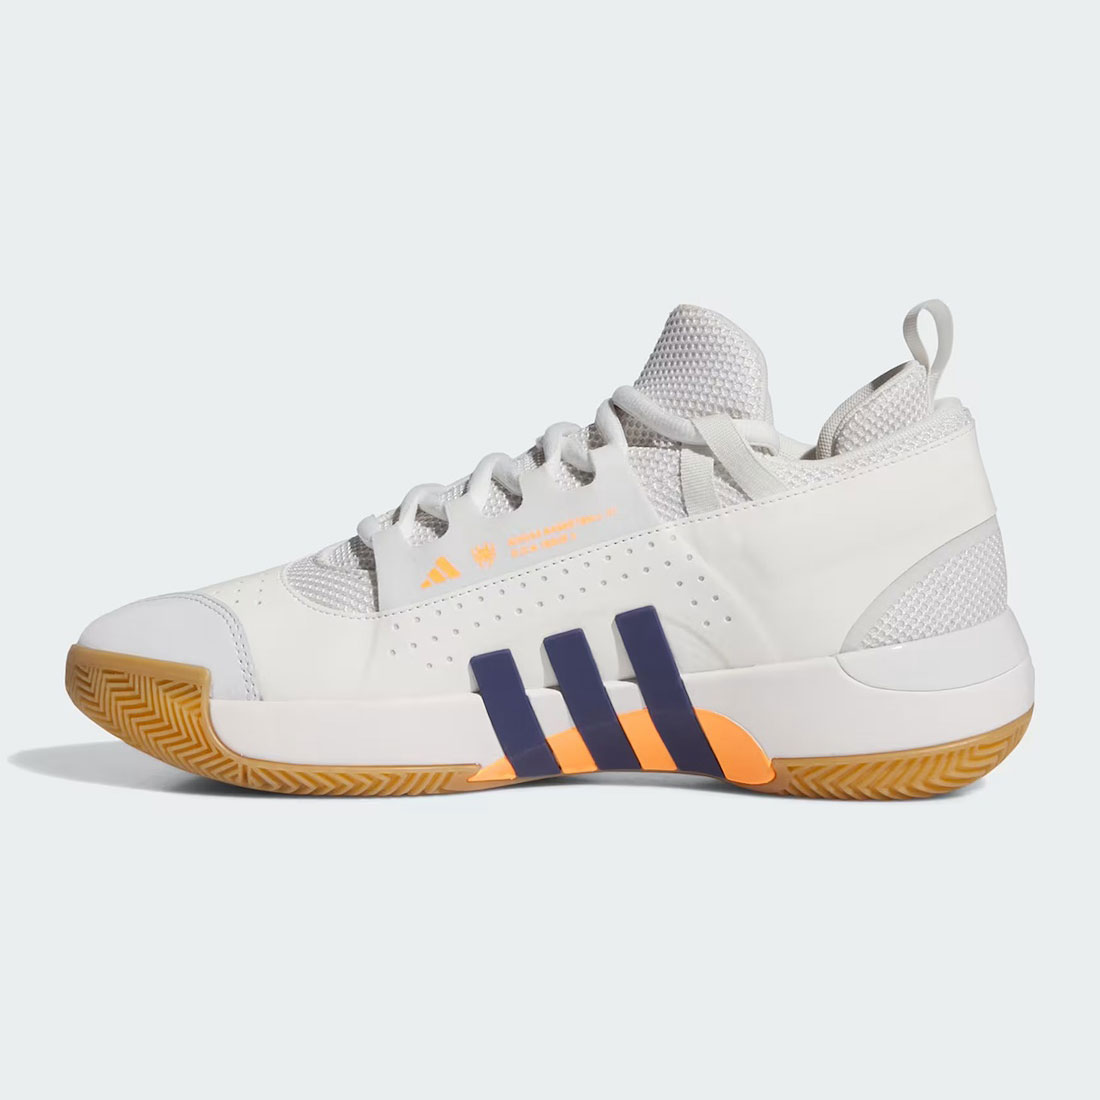 adidas tournament don issue 5 ie7799 2